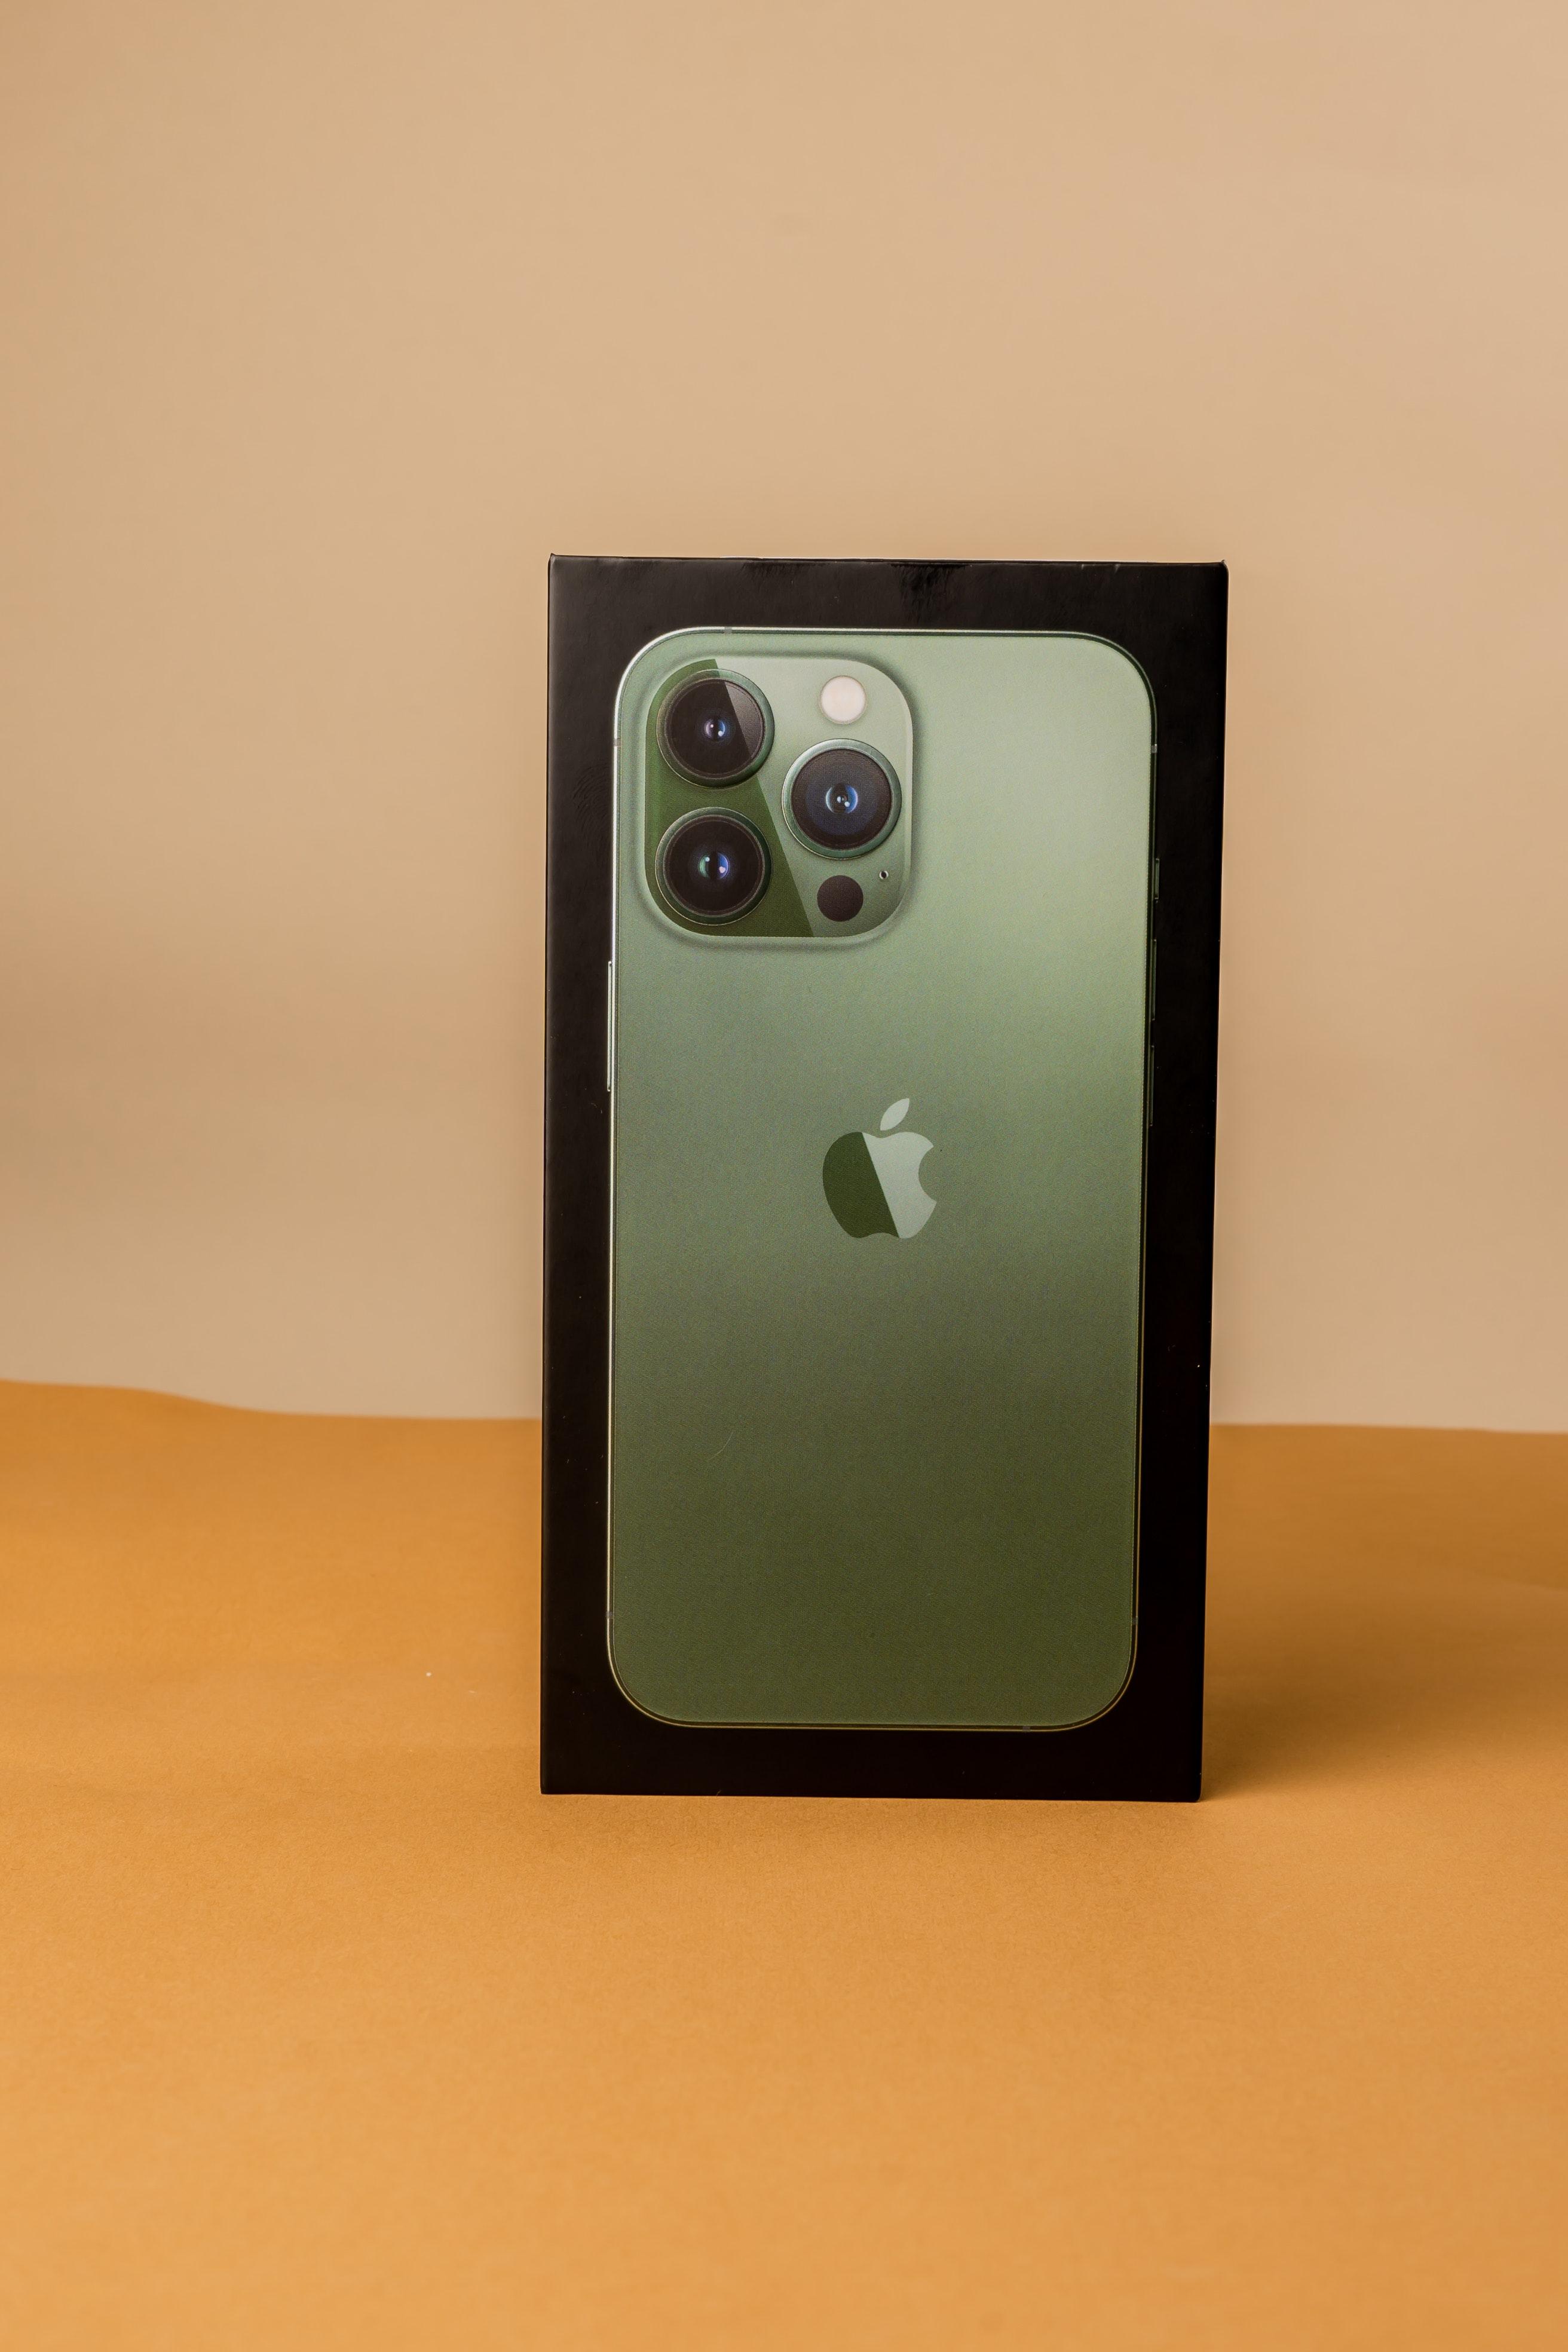  What Are The Apple Stickers For In The Iphone Box 